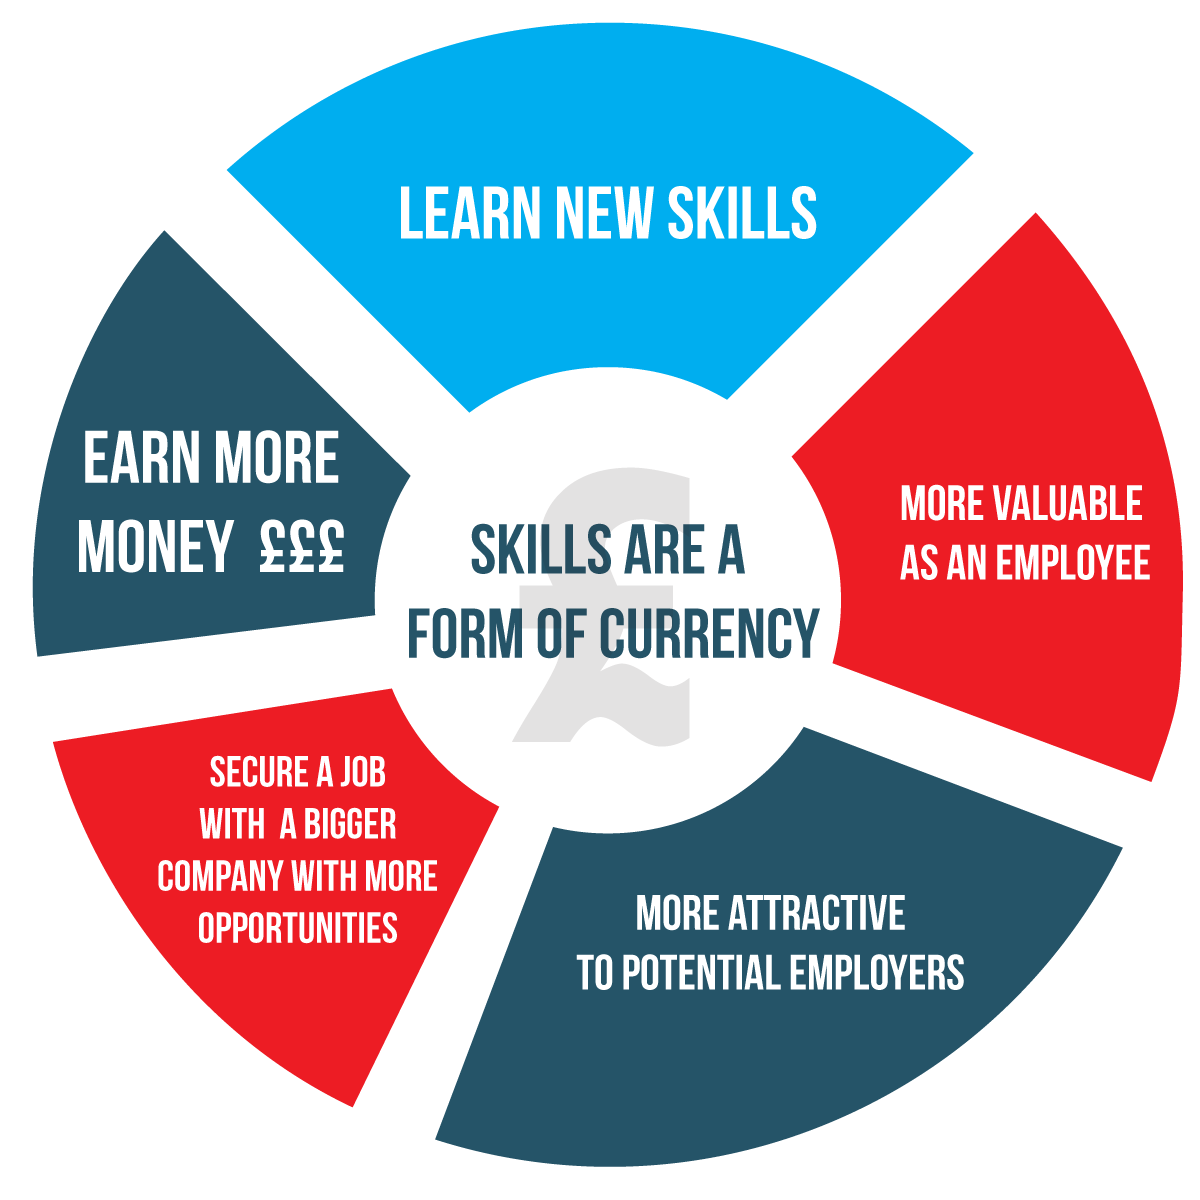 Skills are a form of currency